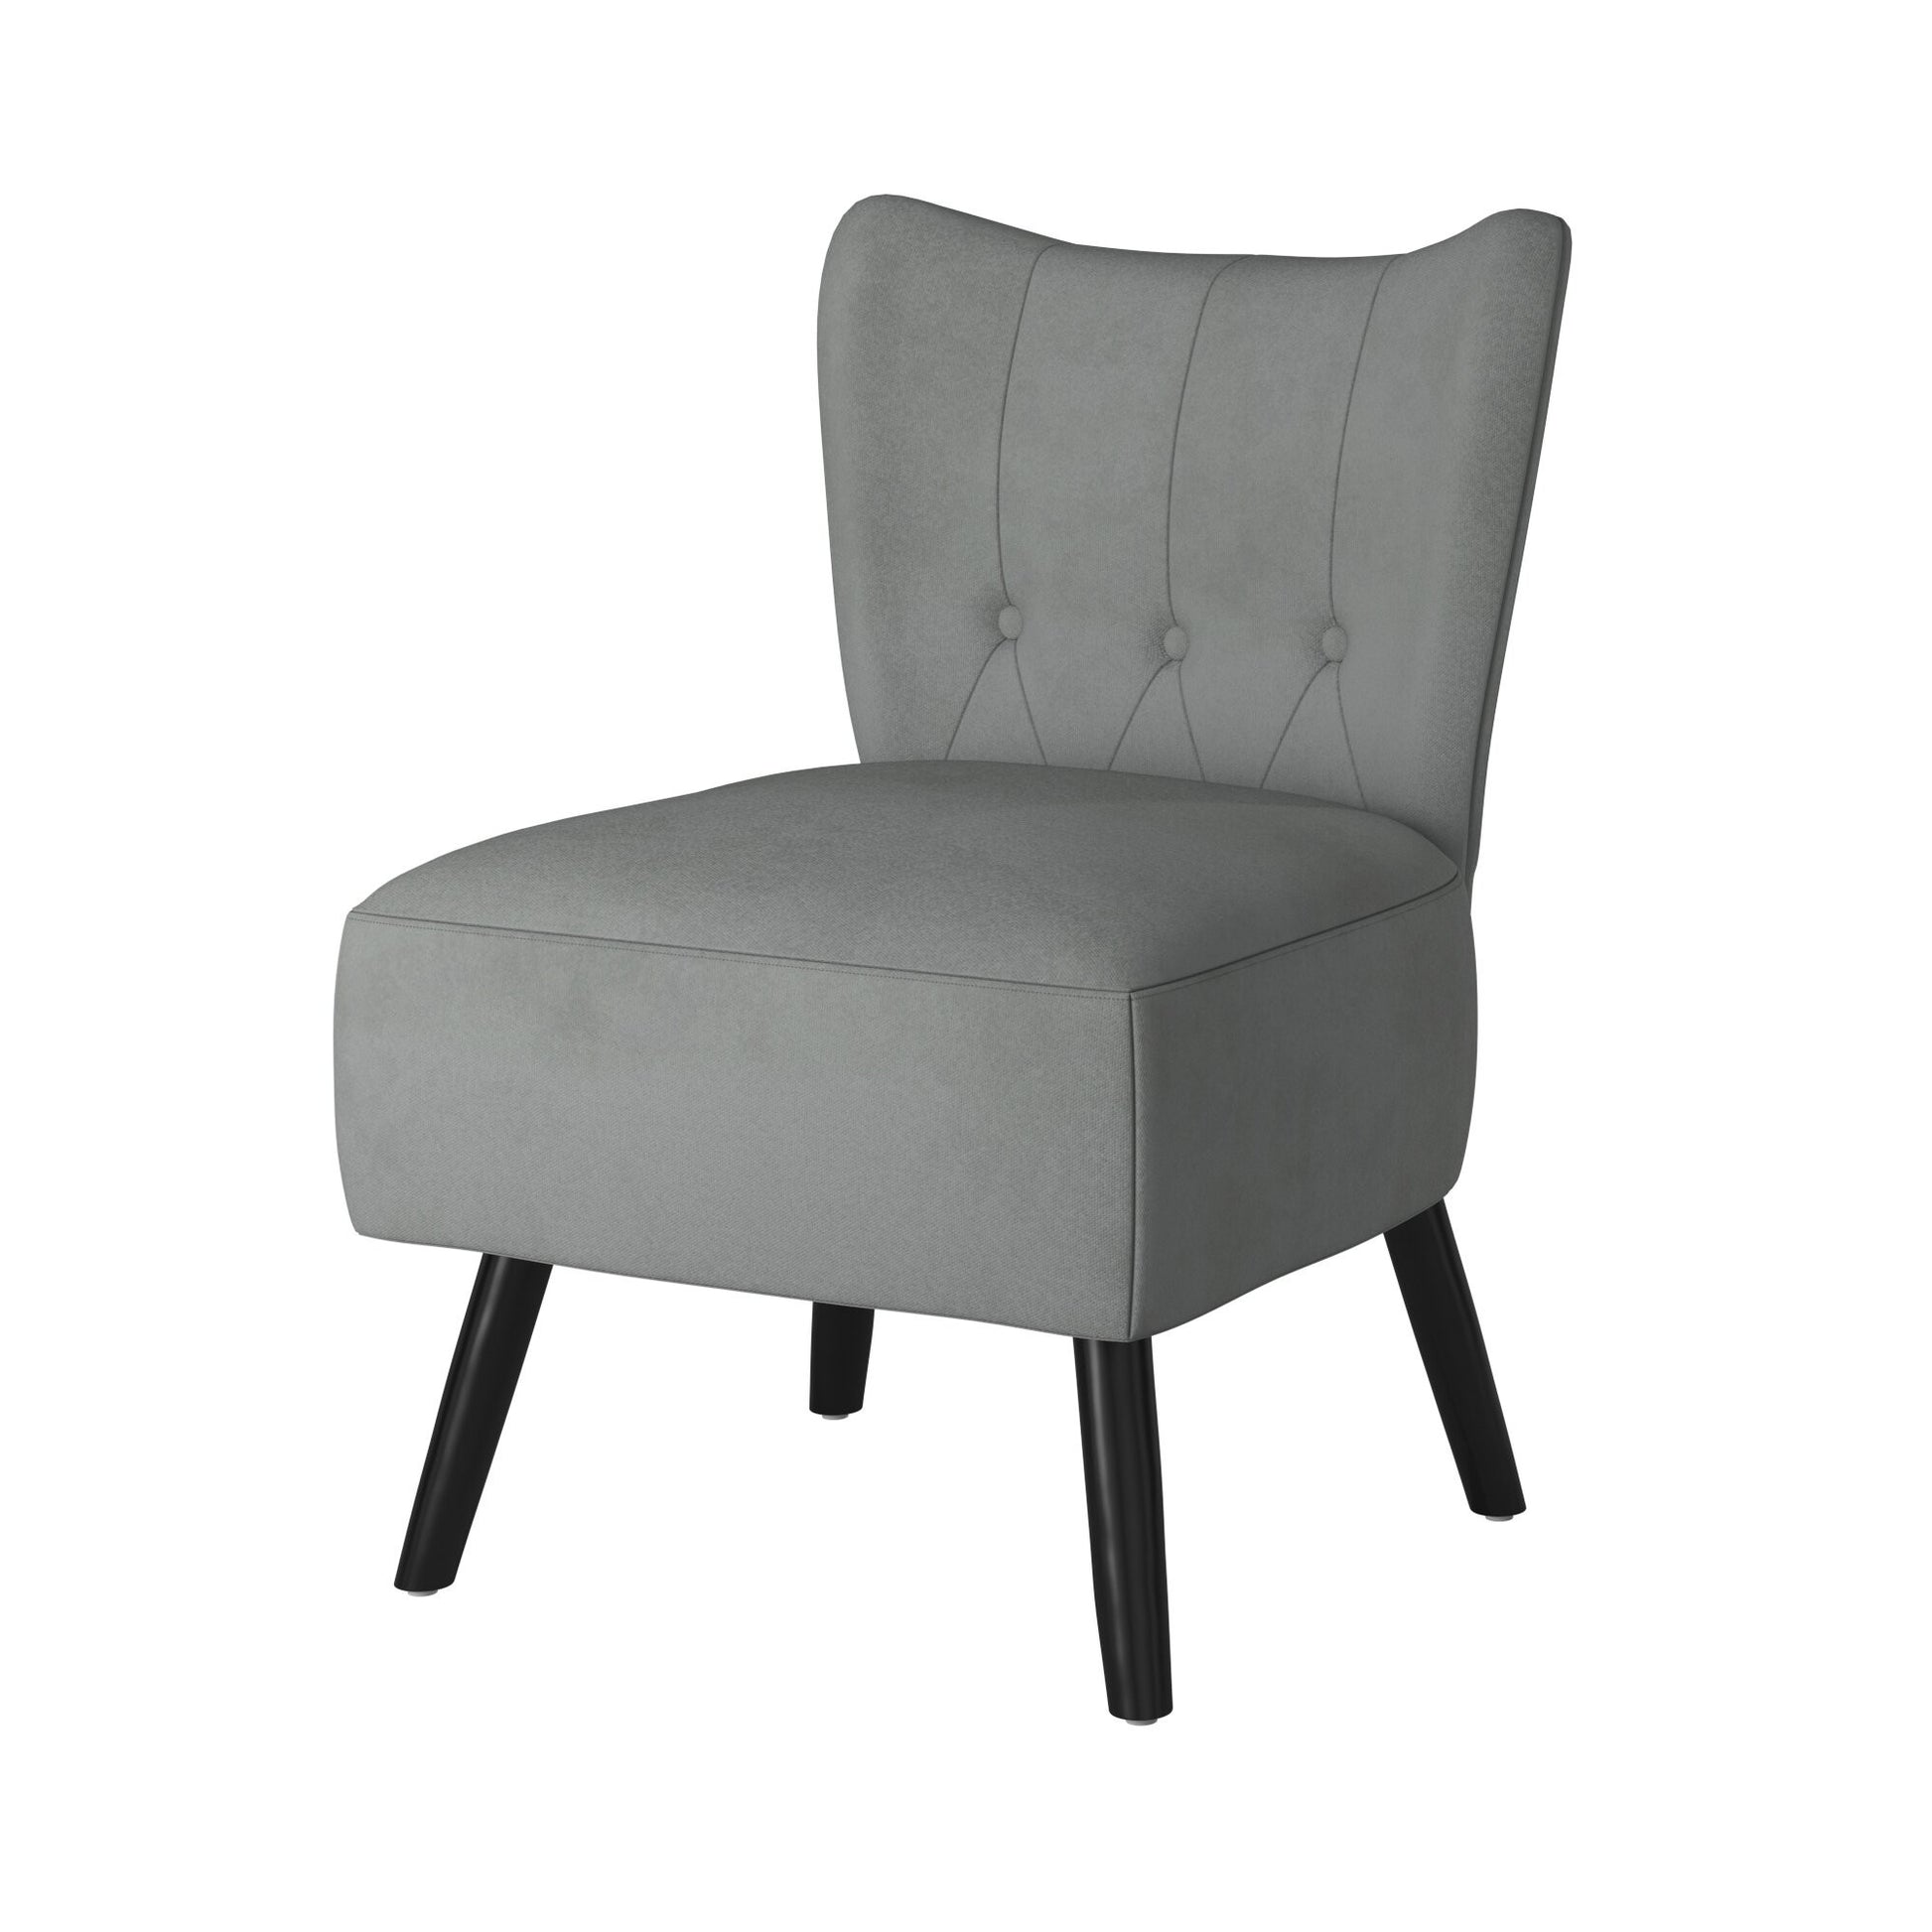 Unique Style Gray Velvet Covering Accent Chair Button gray-primary living space-modern-retro-solid wood